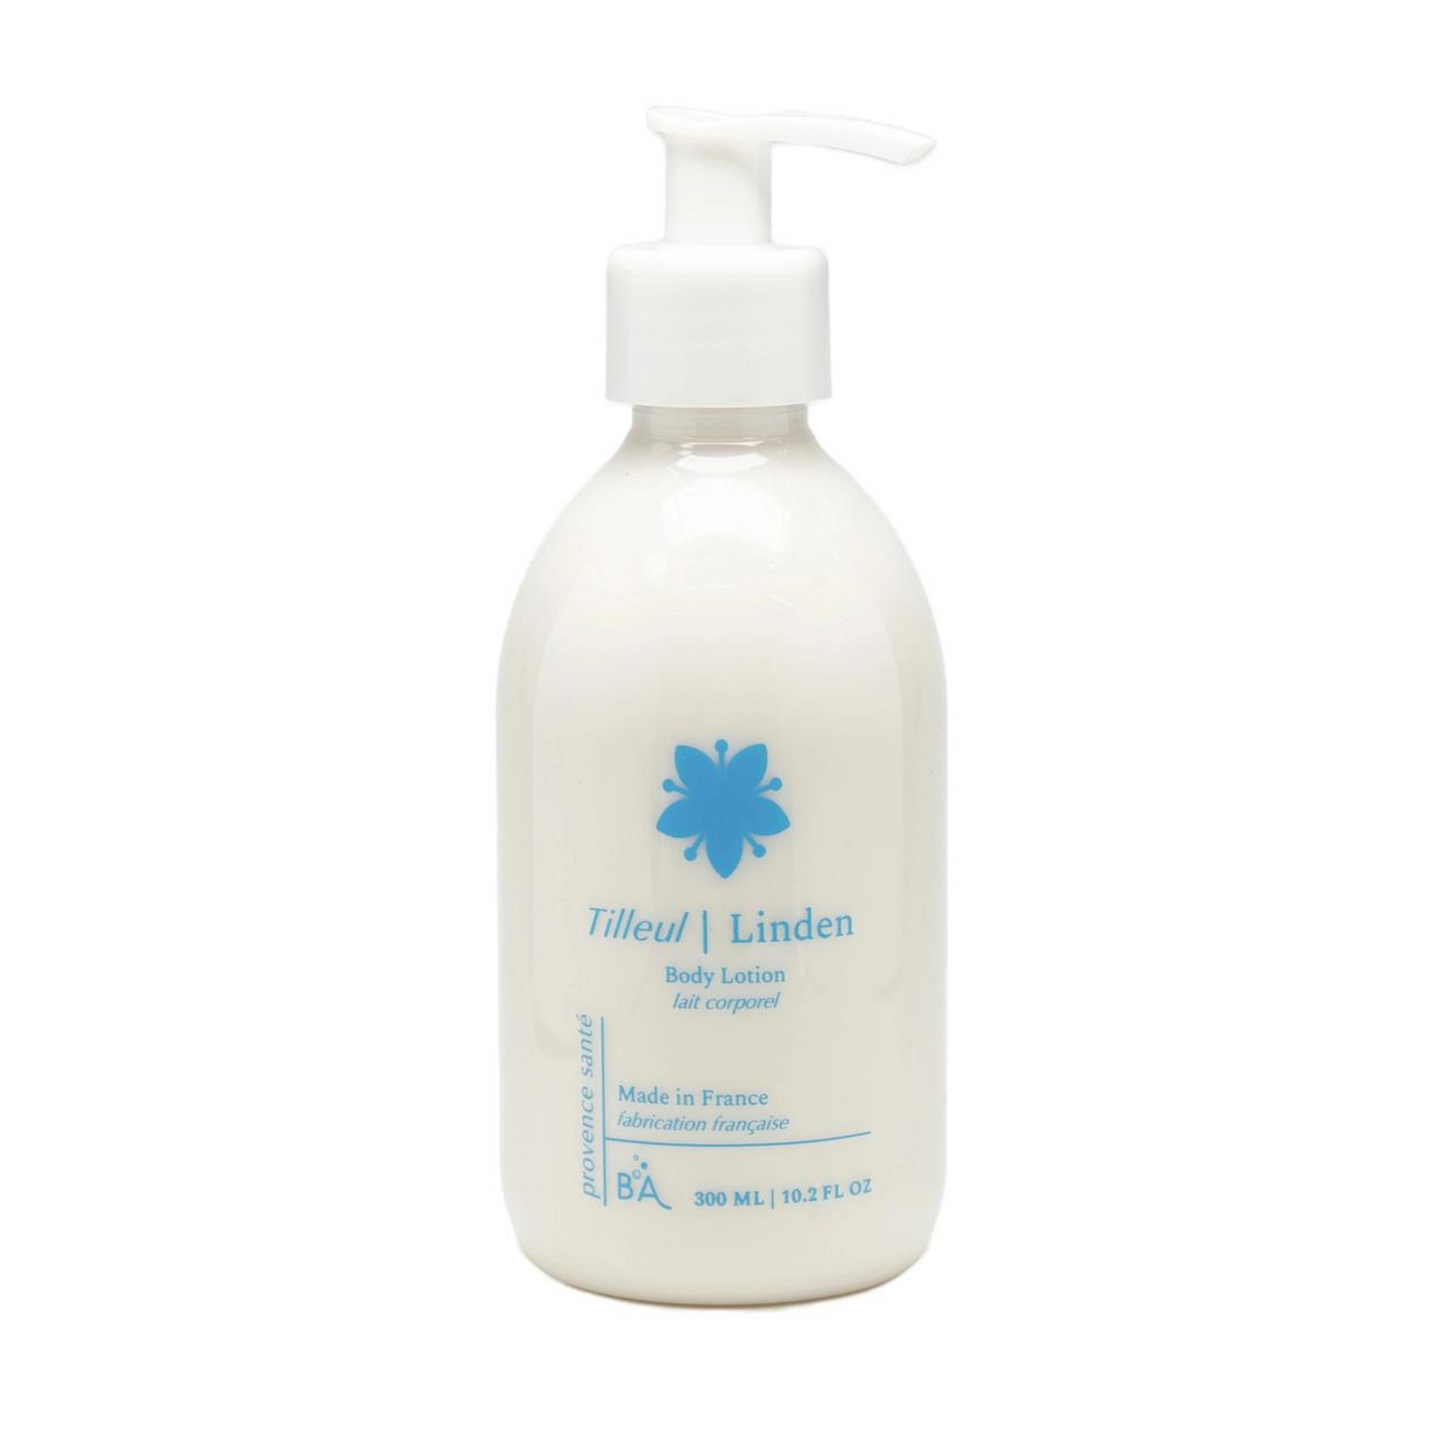 Primary image of Linden Body Lotion